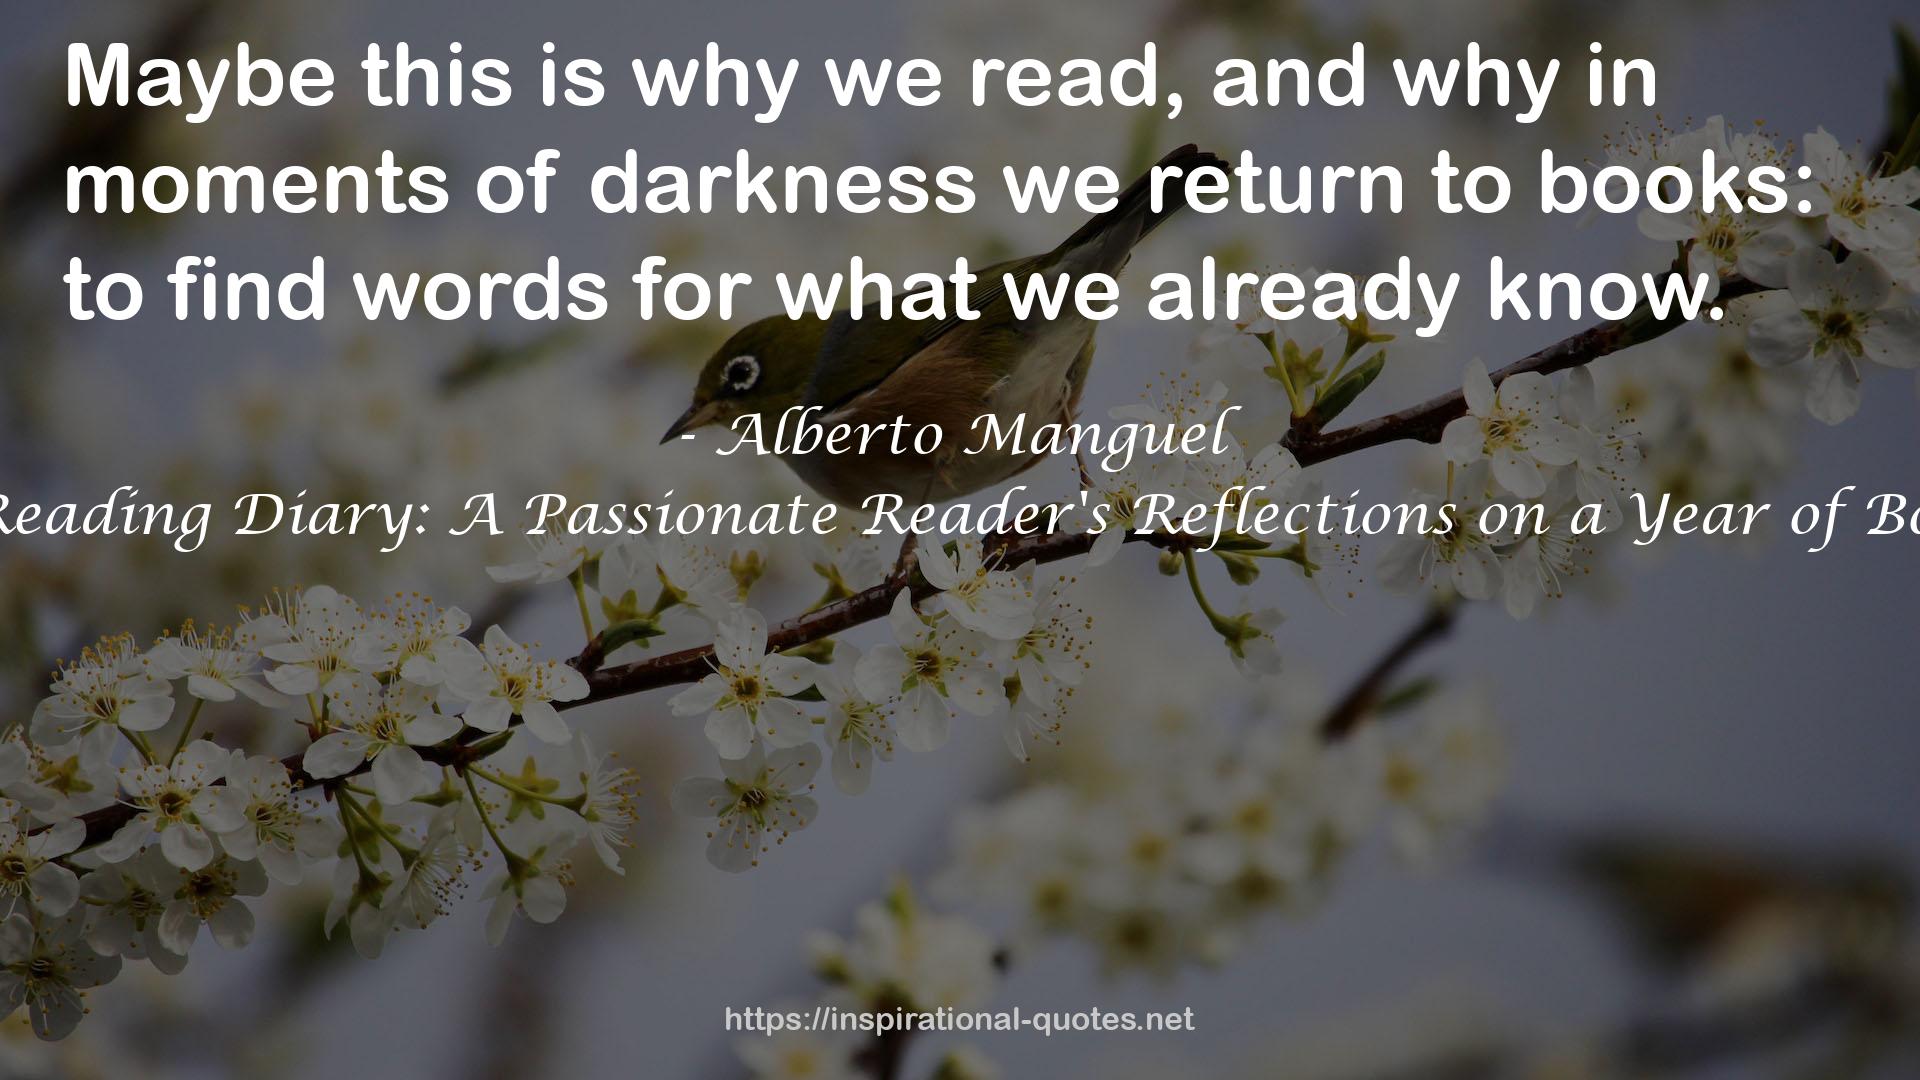 A Reading Diary: A Passionate Reader's Reflections on a Year of Books QUOTES